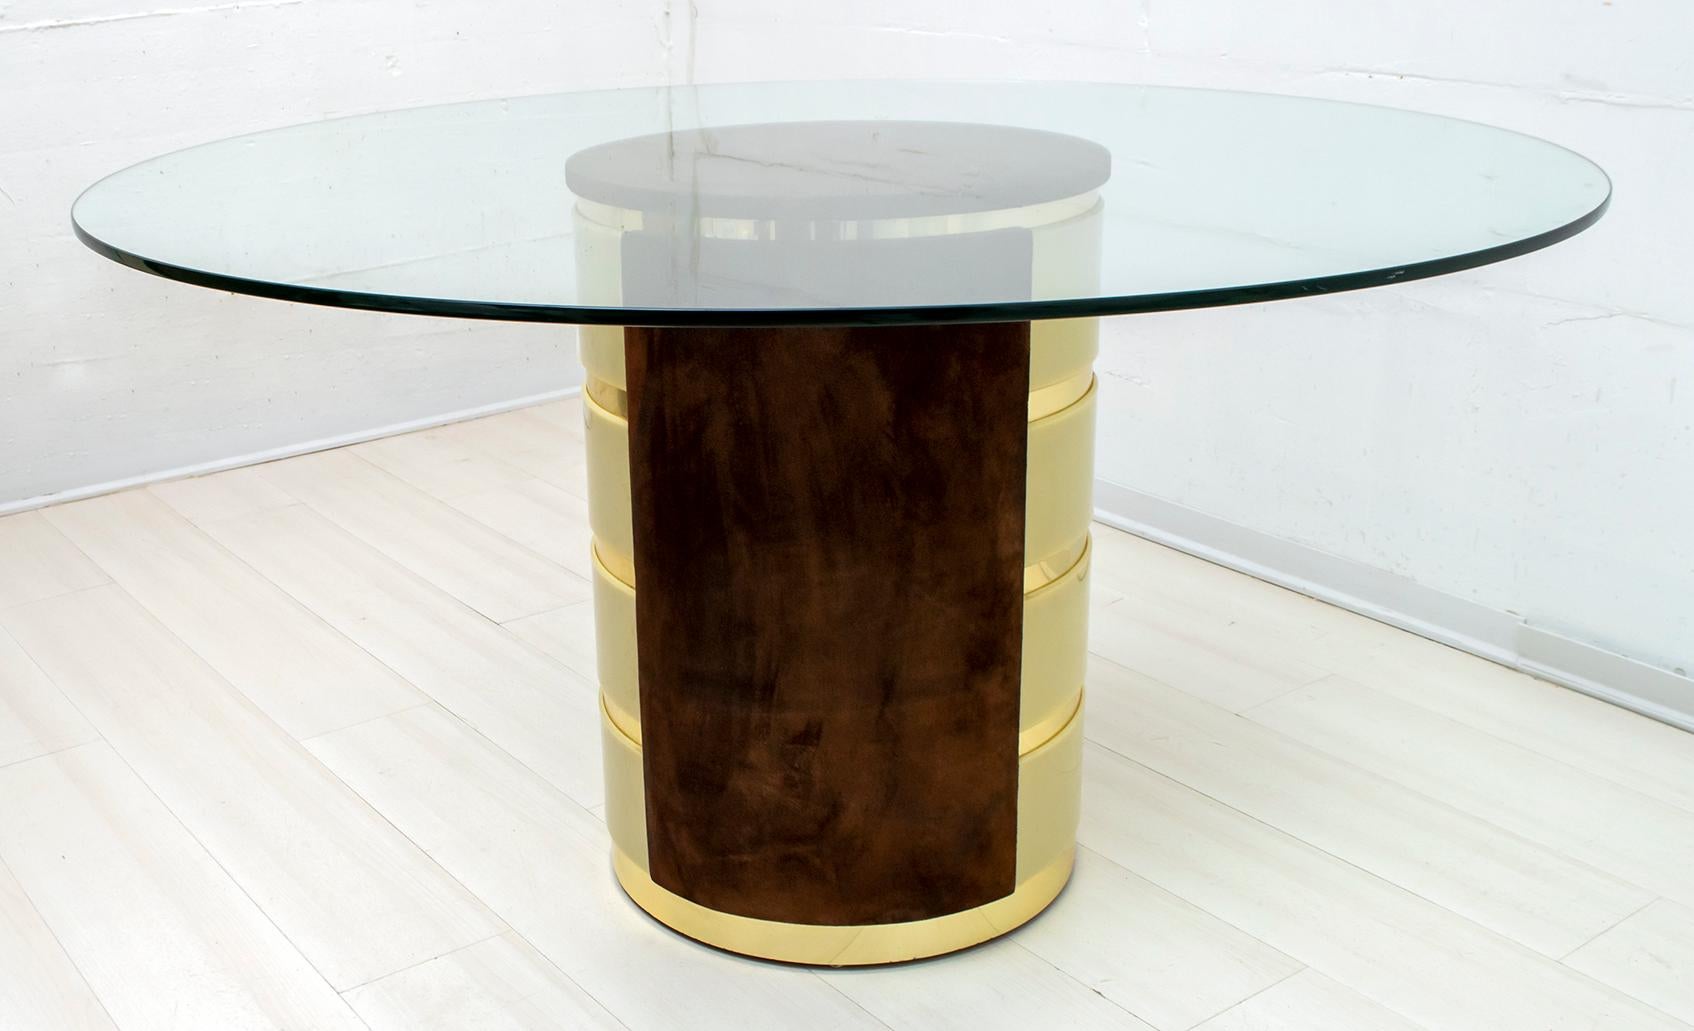 This dining table was designed by the famous Italian design Wlly Rizzo, is covered in suede, plexiglass and aluminum, the top is in crystal. It was produced in Italy in the 1970s

The base measures 52 cm in diameter

Willy Rizzo is a great 20th